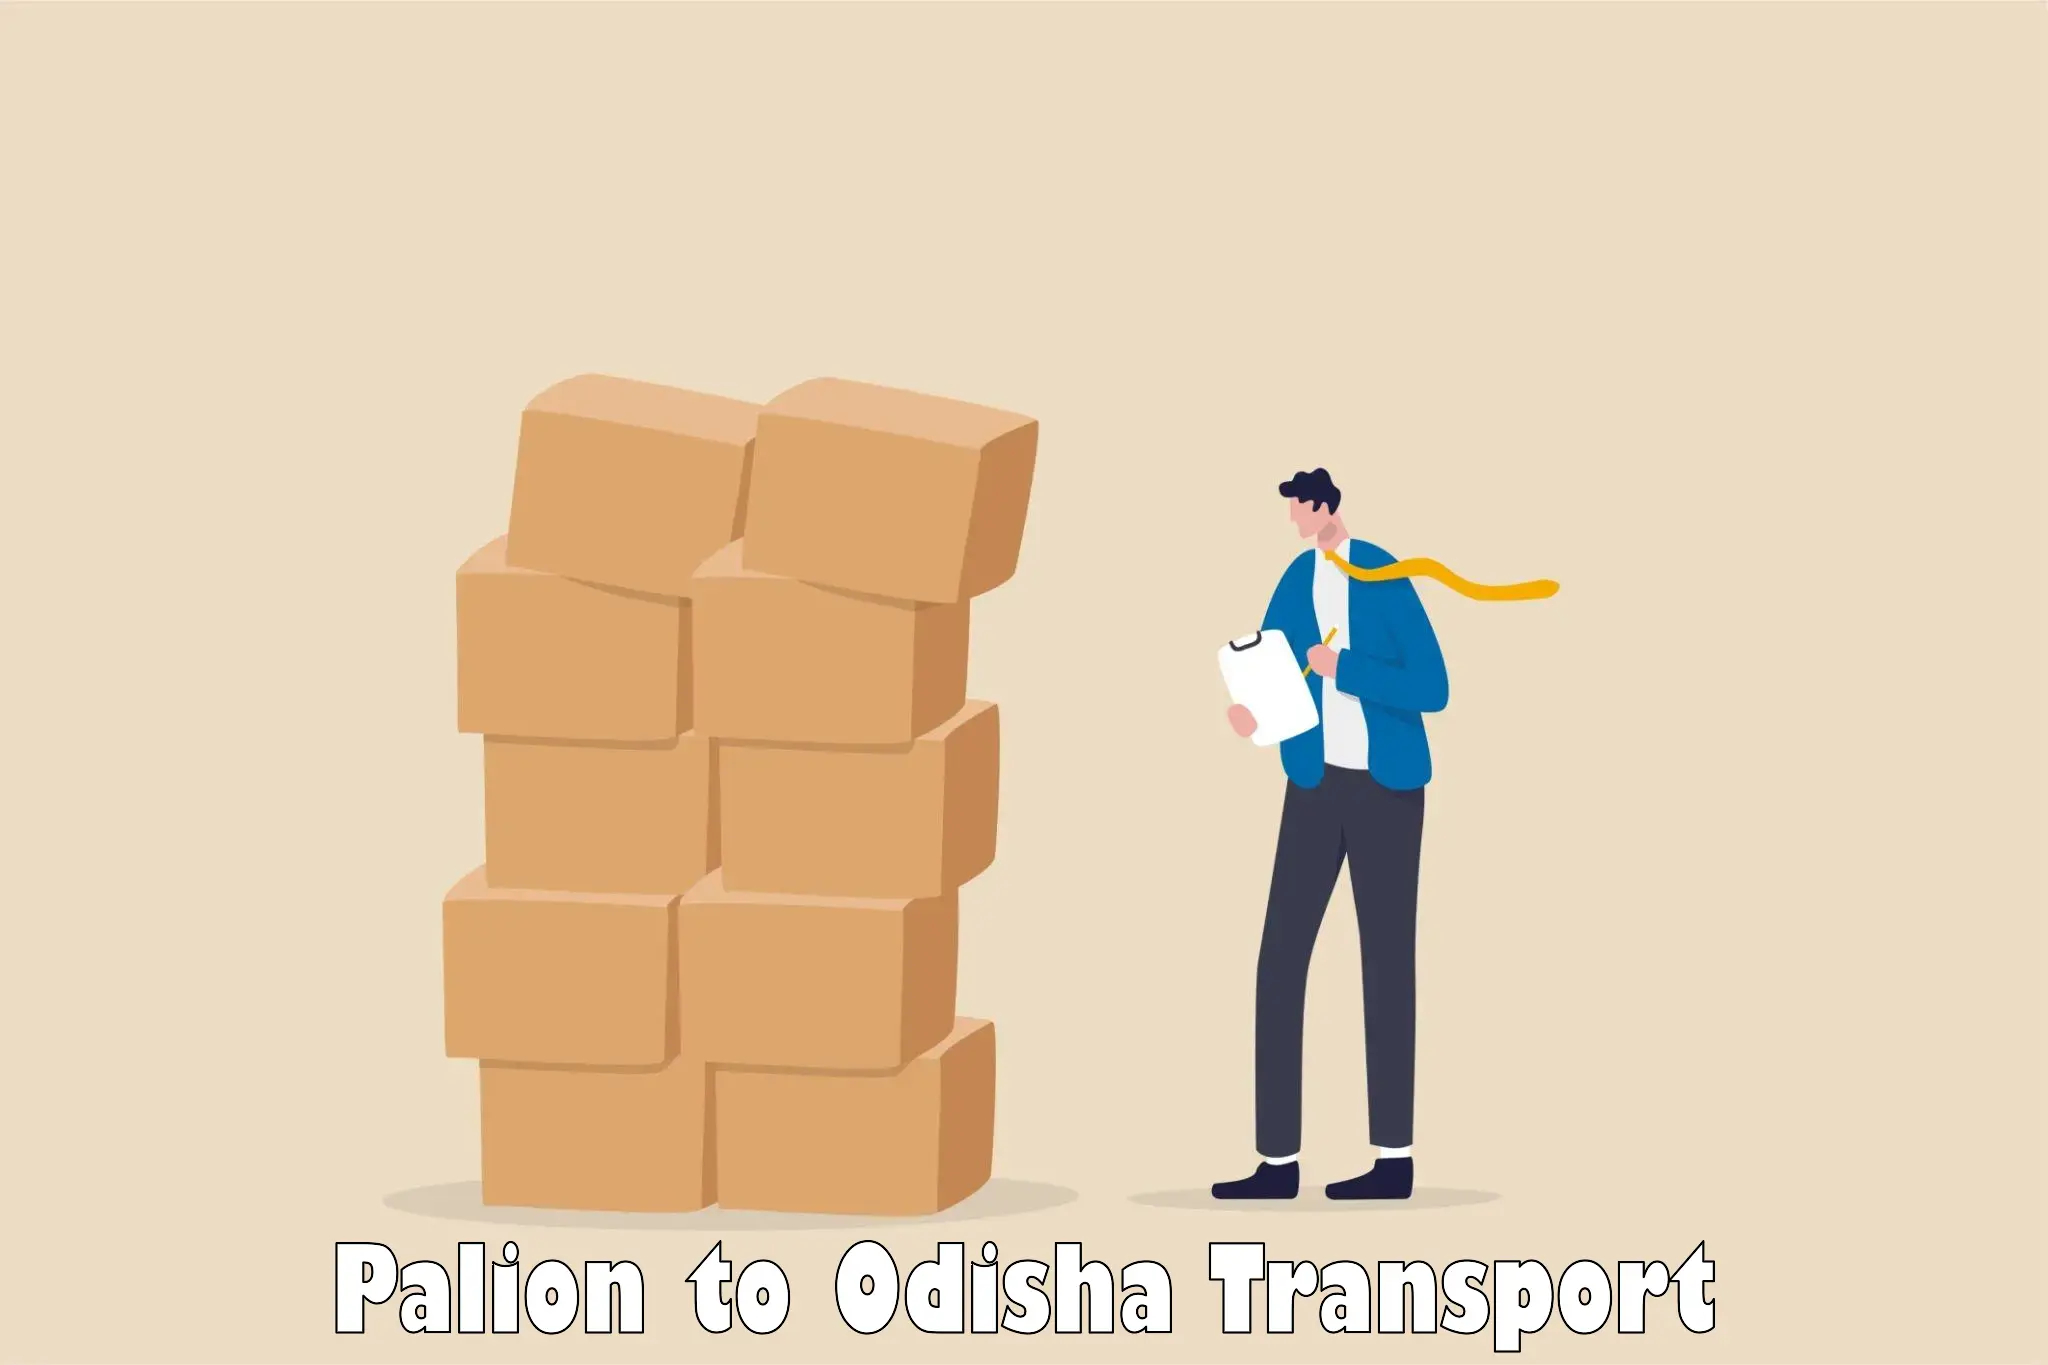 Commercial transport service Palion to Odisha